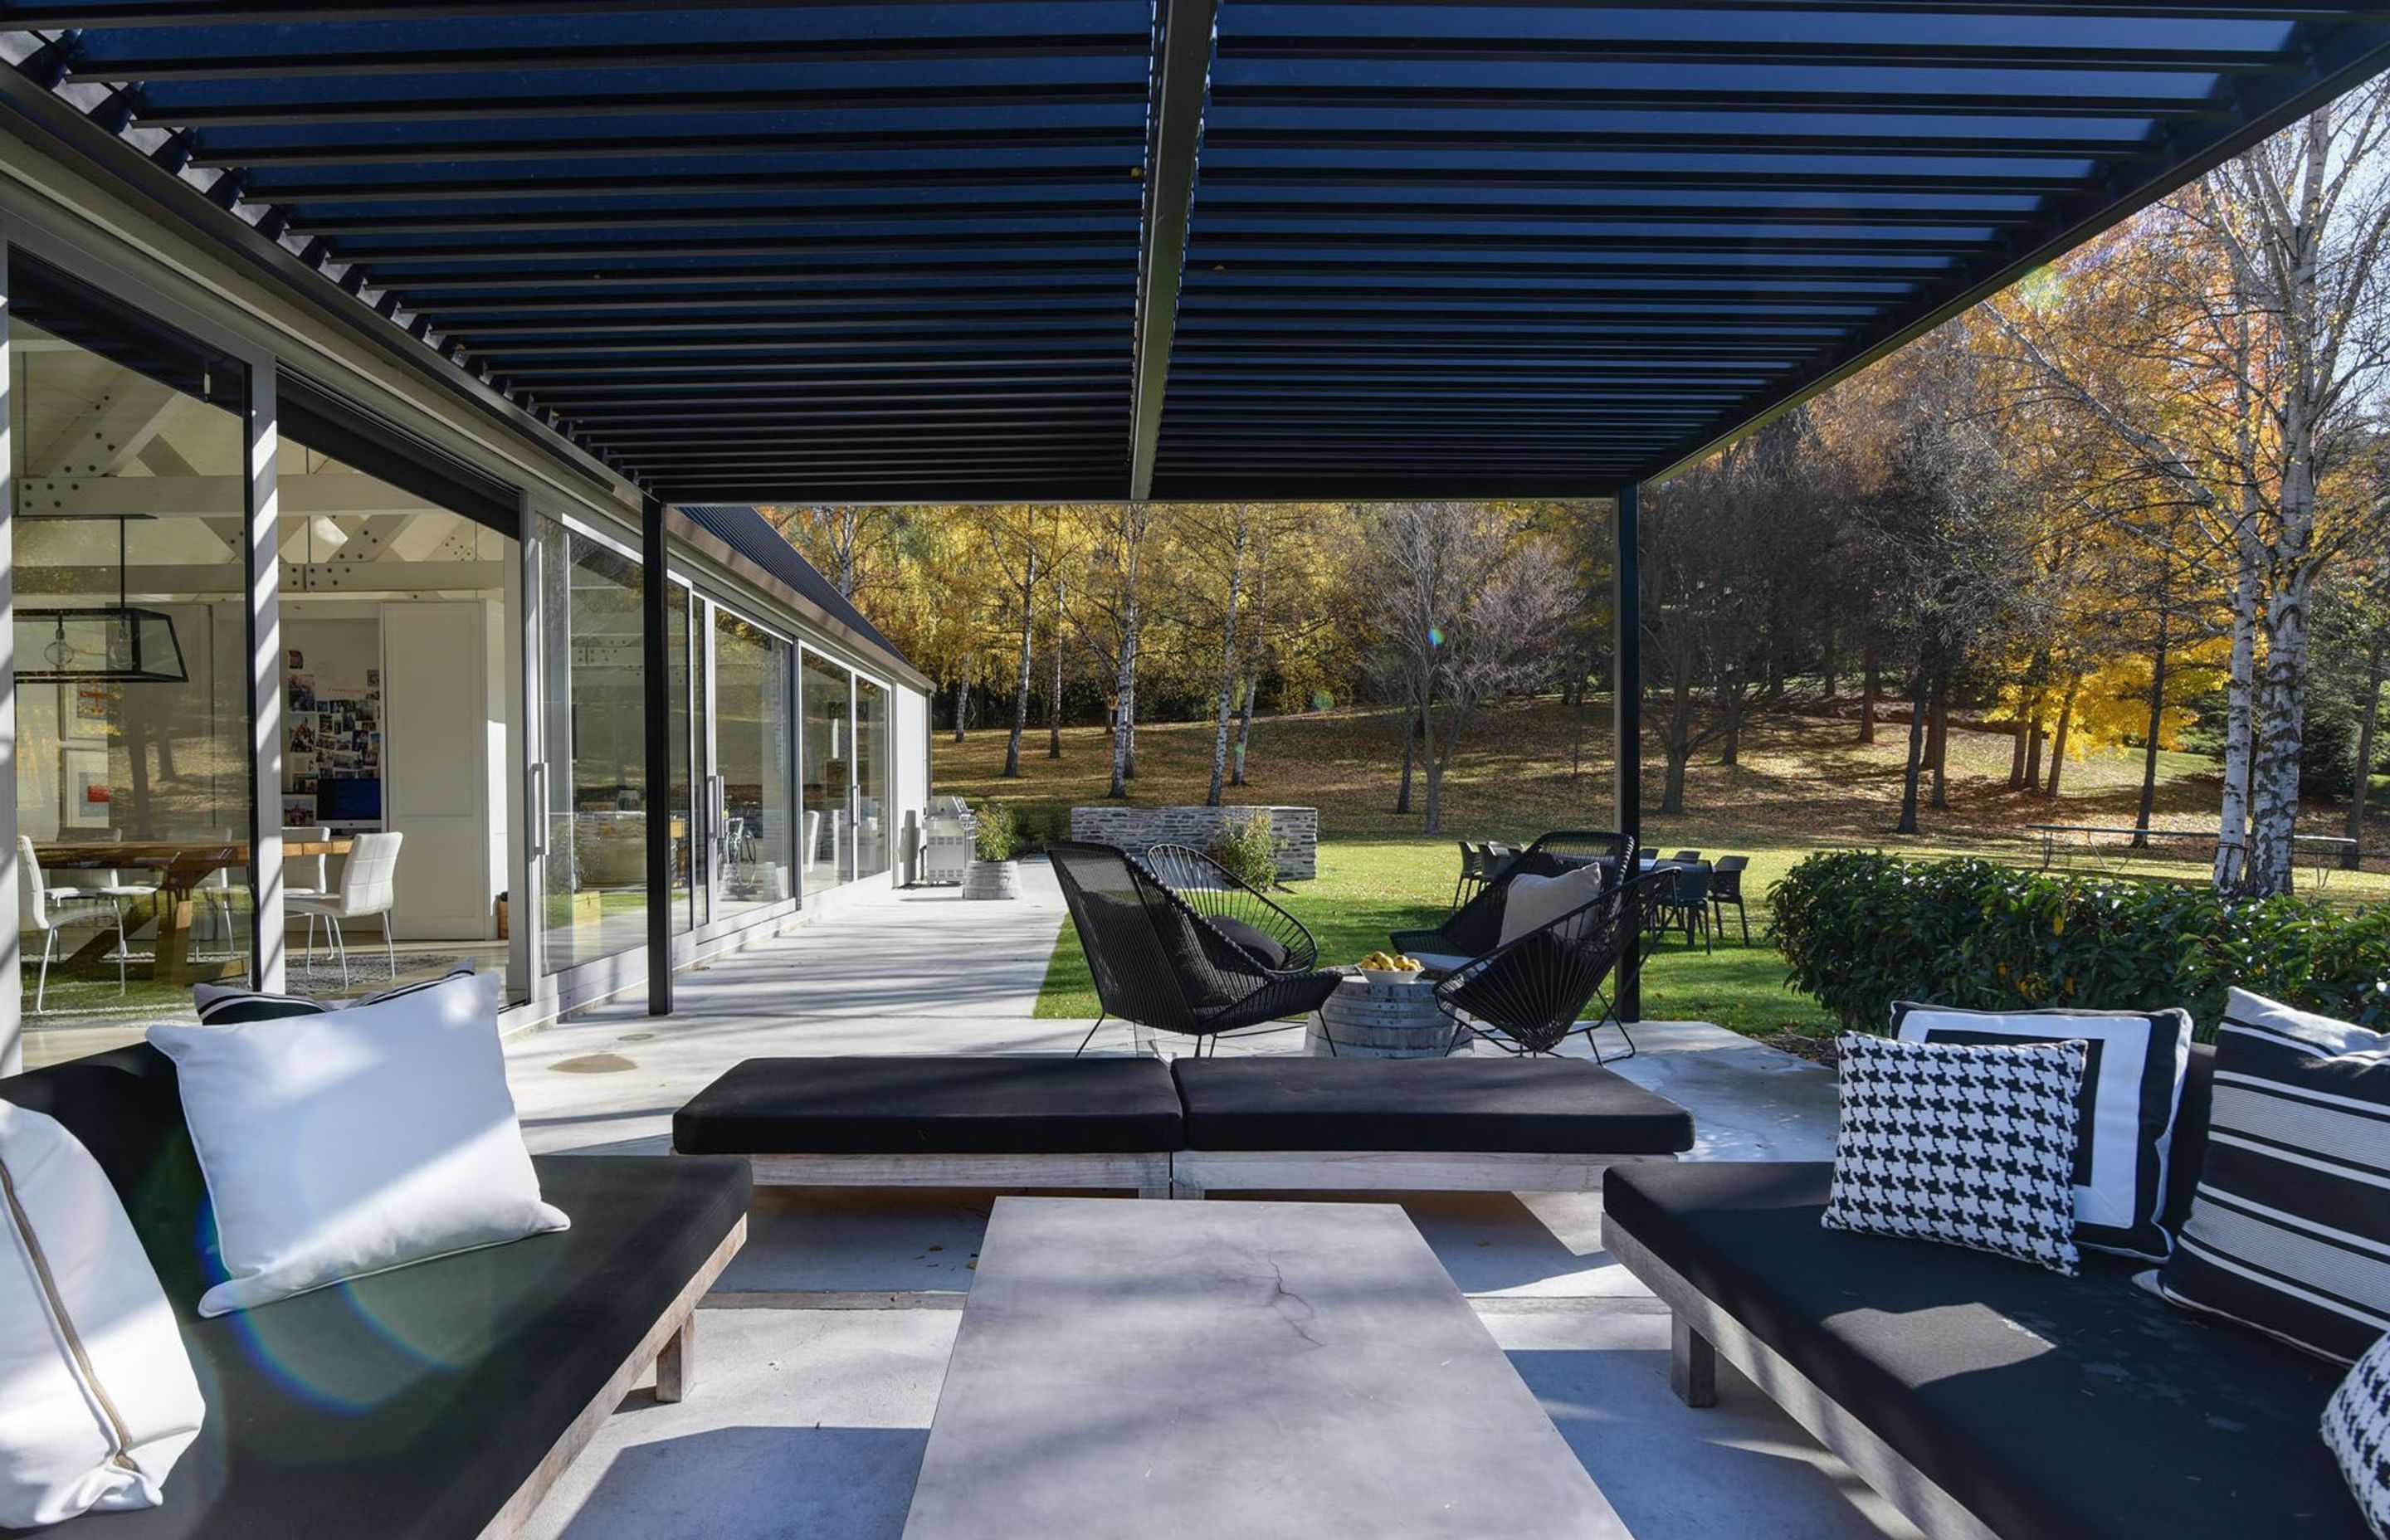 There are several things to consider when implementing an outdoor room.